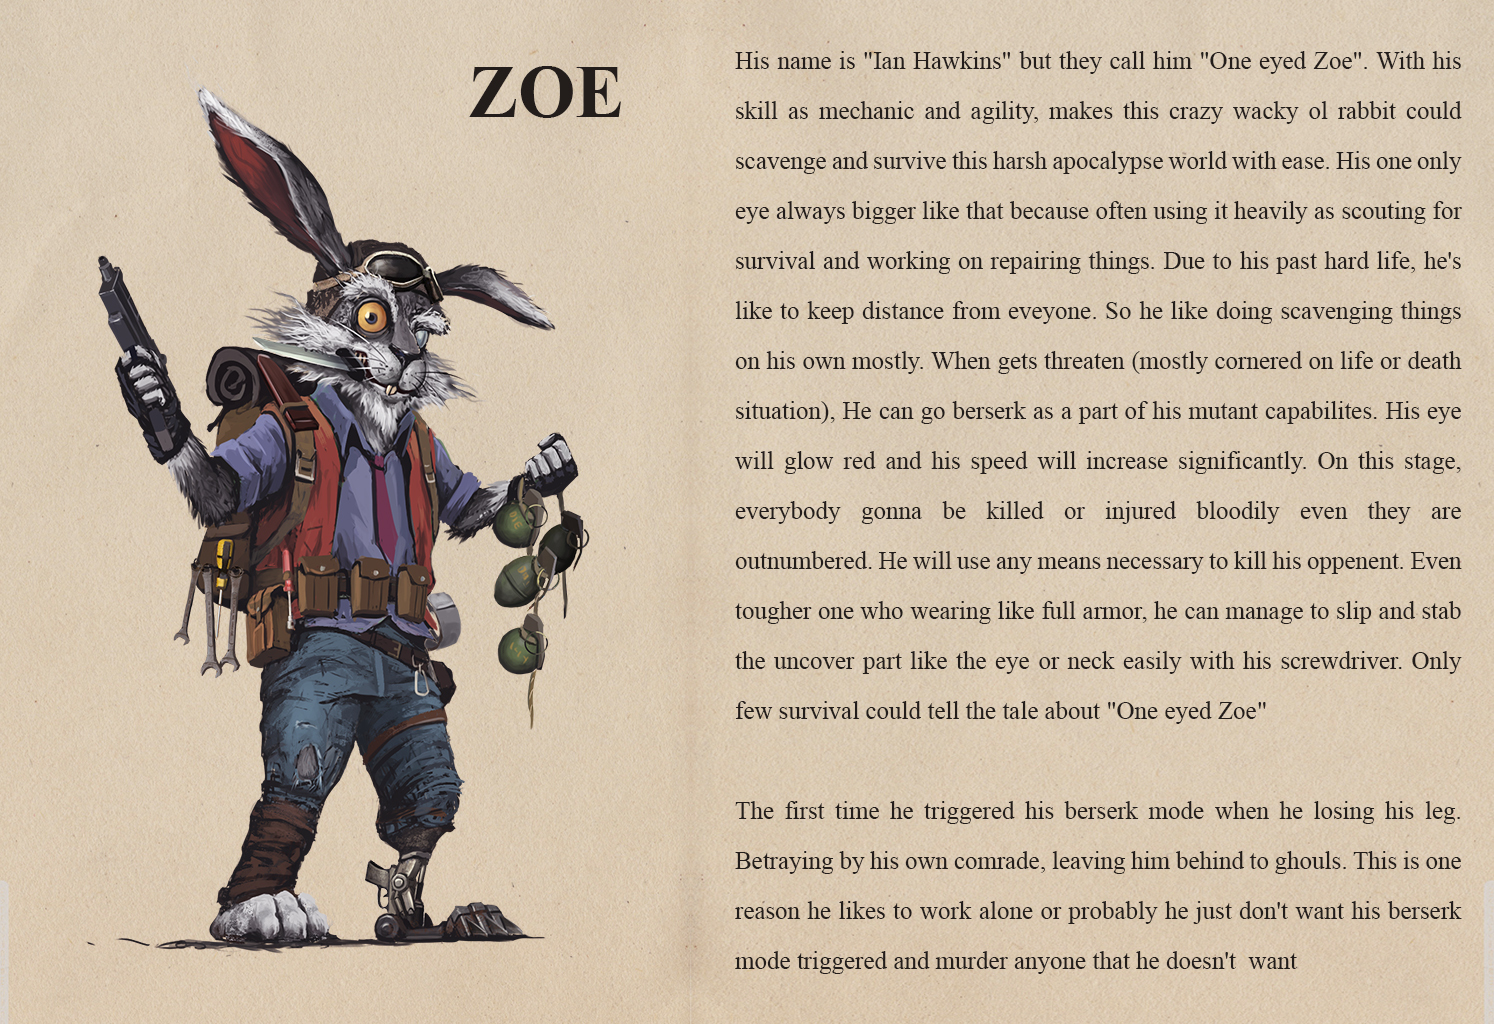 May 23 19 Seed Of Evil The New Mutant Year Zero Expansion Revealed Mutant Year Zero Road To Eden Jens Erik Community Manager We Re Excited To Reveal The New Expansion To Mutant Year Zero Road To Eden It S Called Seed Of Evil And It Will